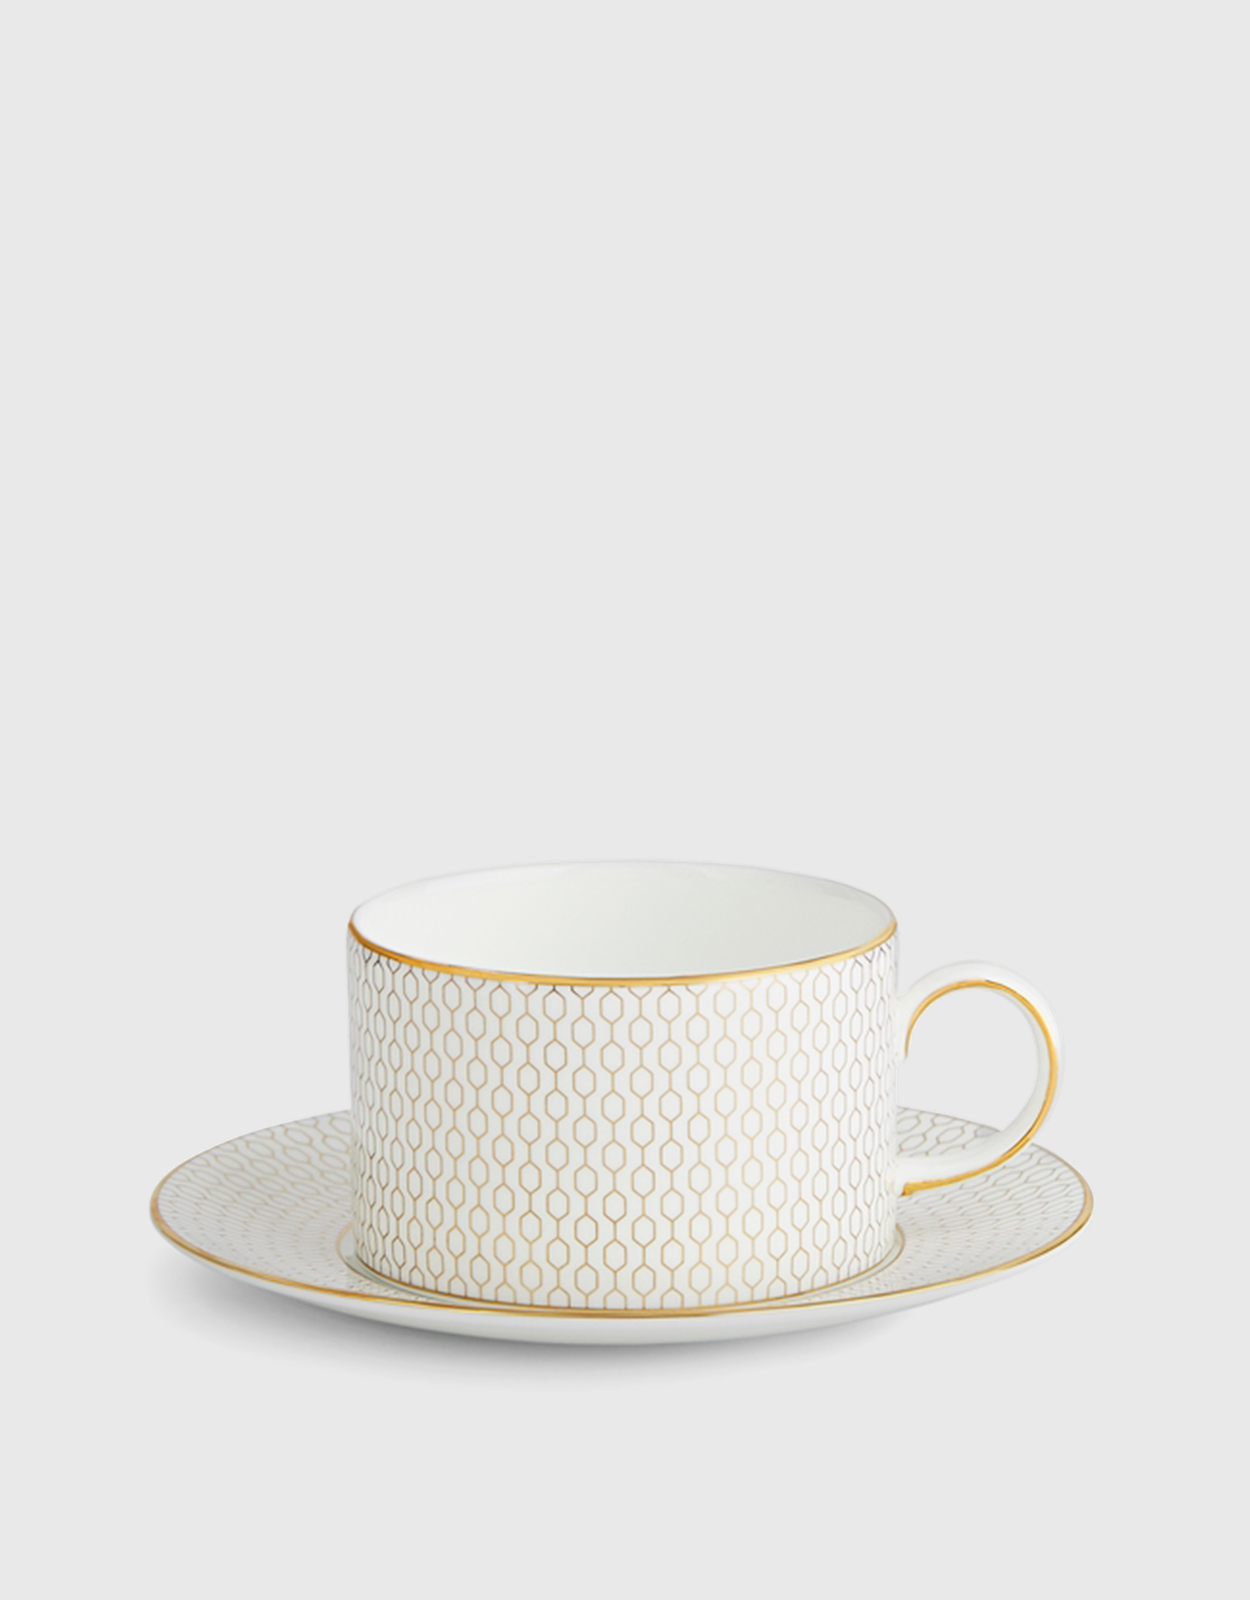 Wedgwood ARRIS Accent Espresso Cup and Saucer (Set of 4)